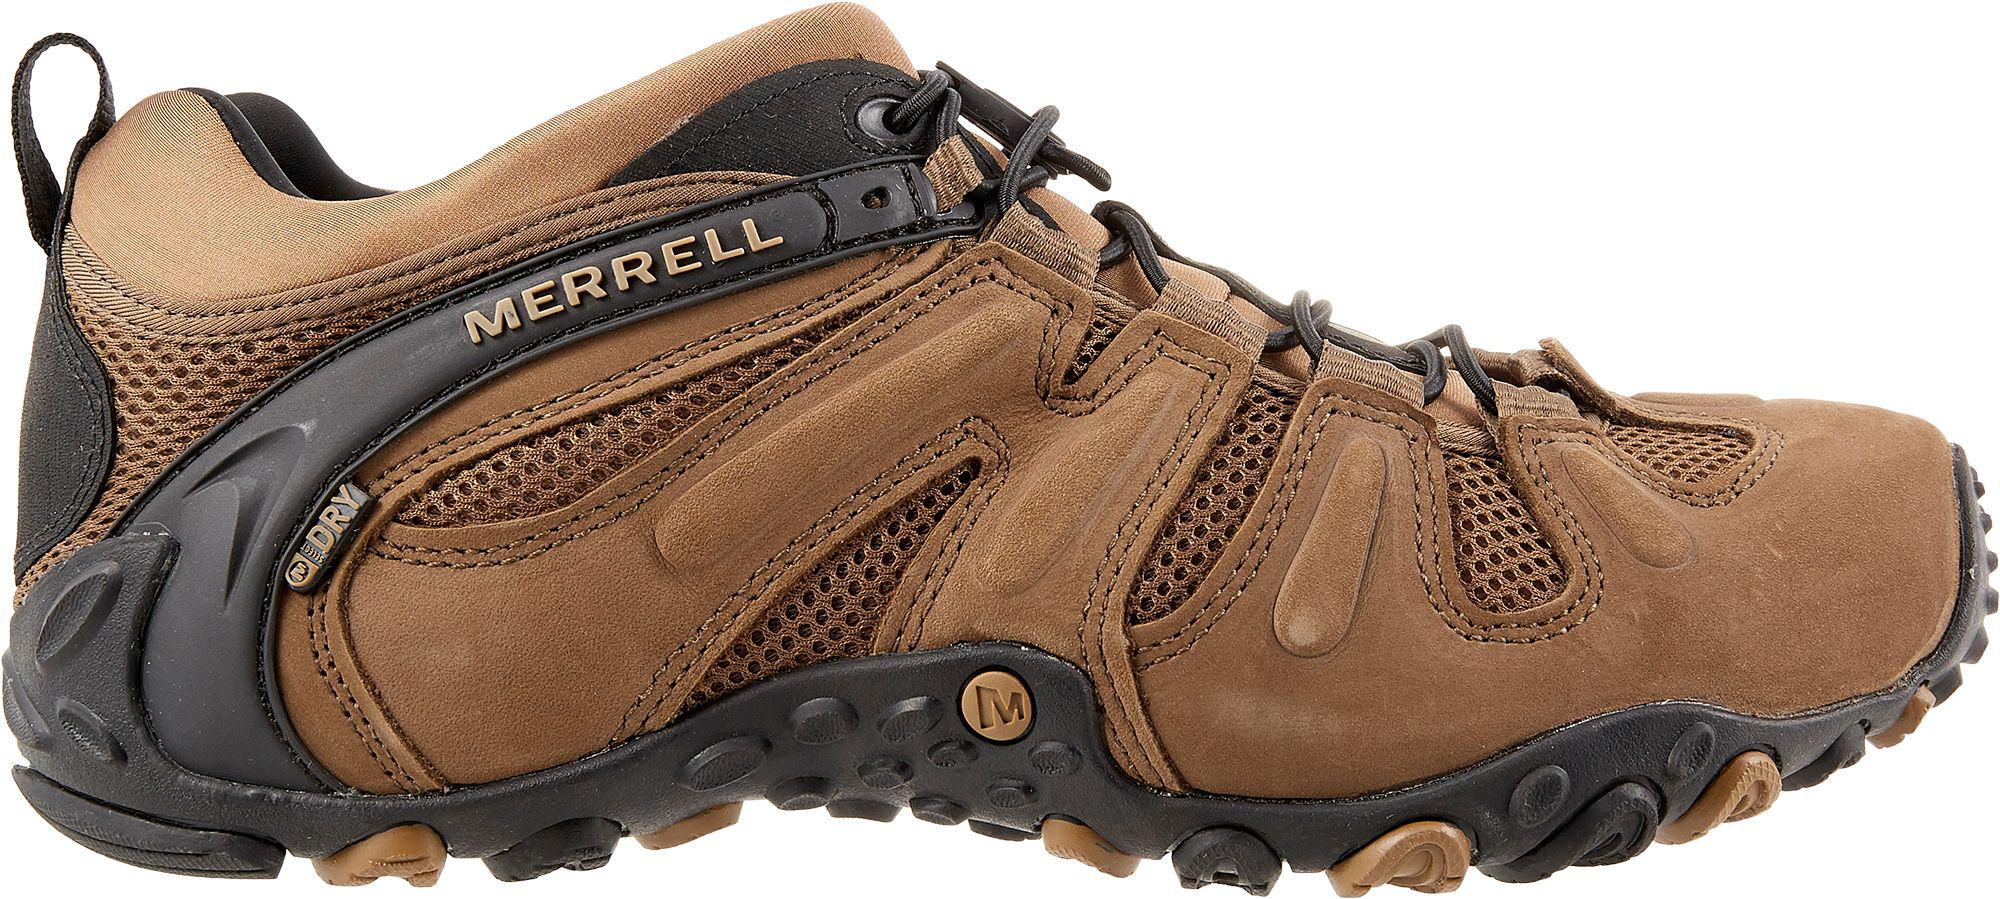 Merrell Leather Chameleon Prime Stretch Waterproof Hiking Shoes in Green  for Men - Lyst